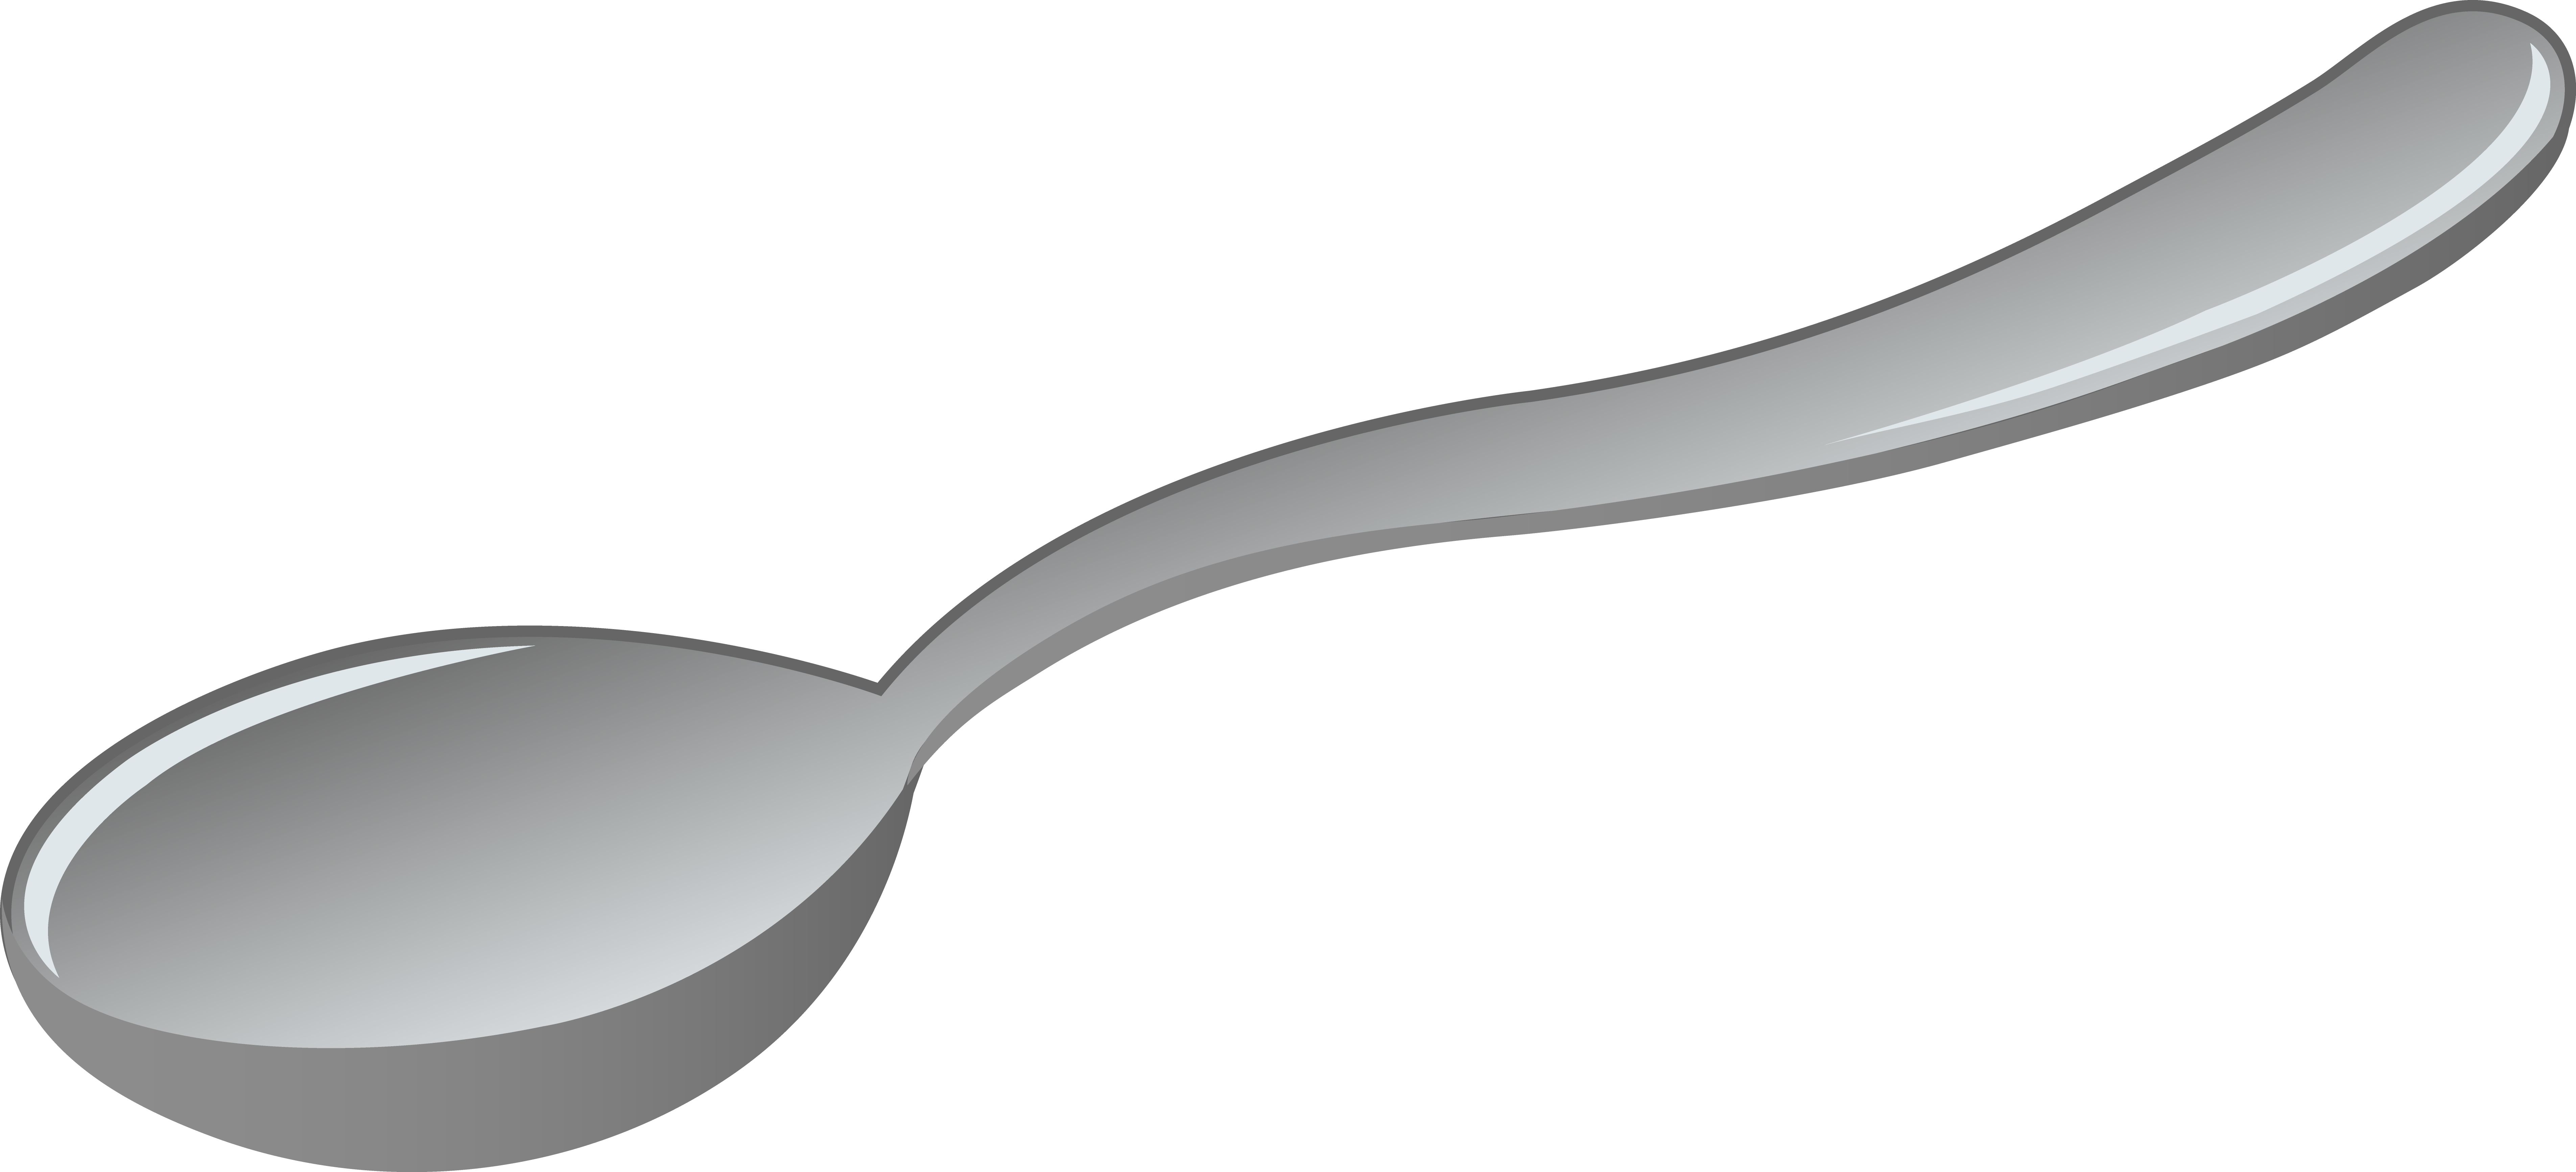 Refrain - Cartoon Picture Of Spoon (7619x3467)